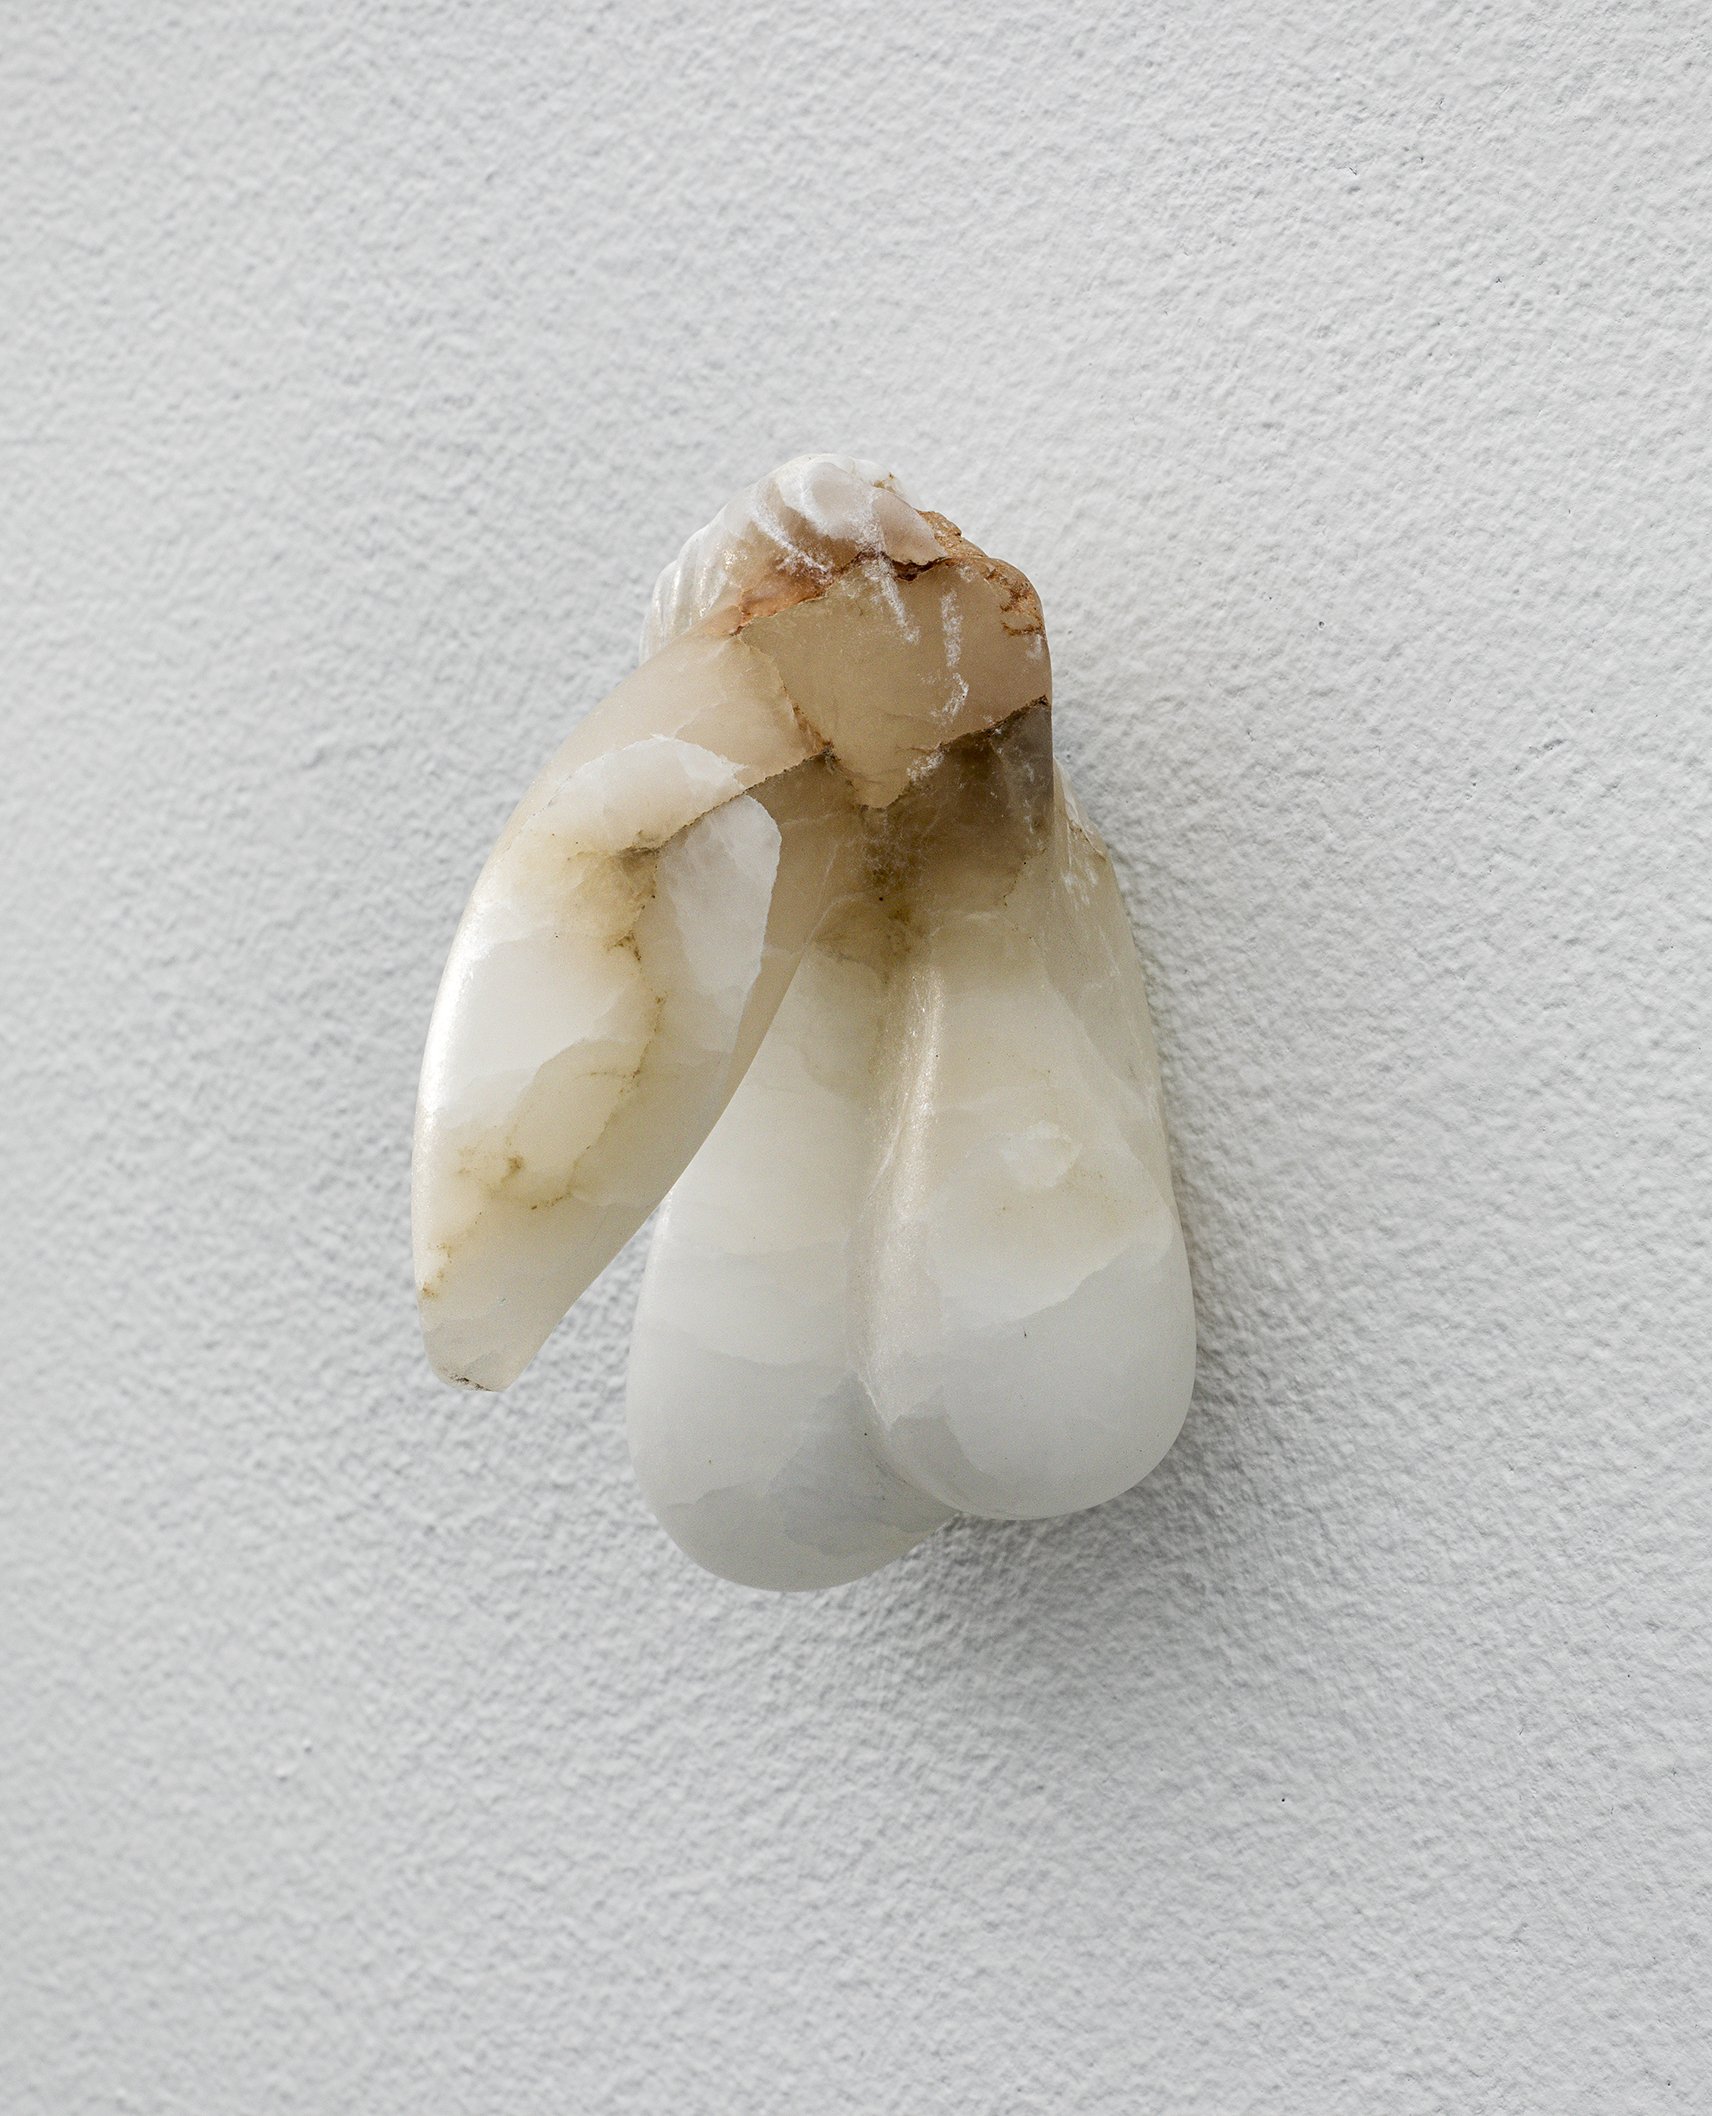  Covey Gong, Untitled, 2022. Alabaster with aluminum hanging mechanism. 3.75 x 2.25 x 3.25 inches. 